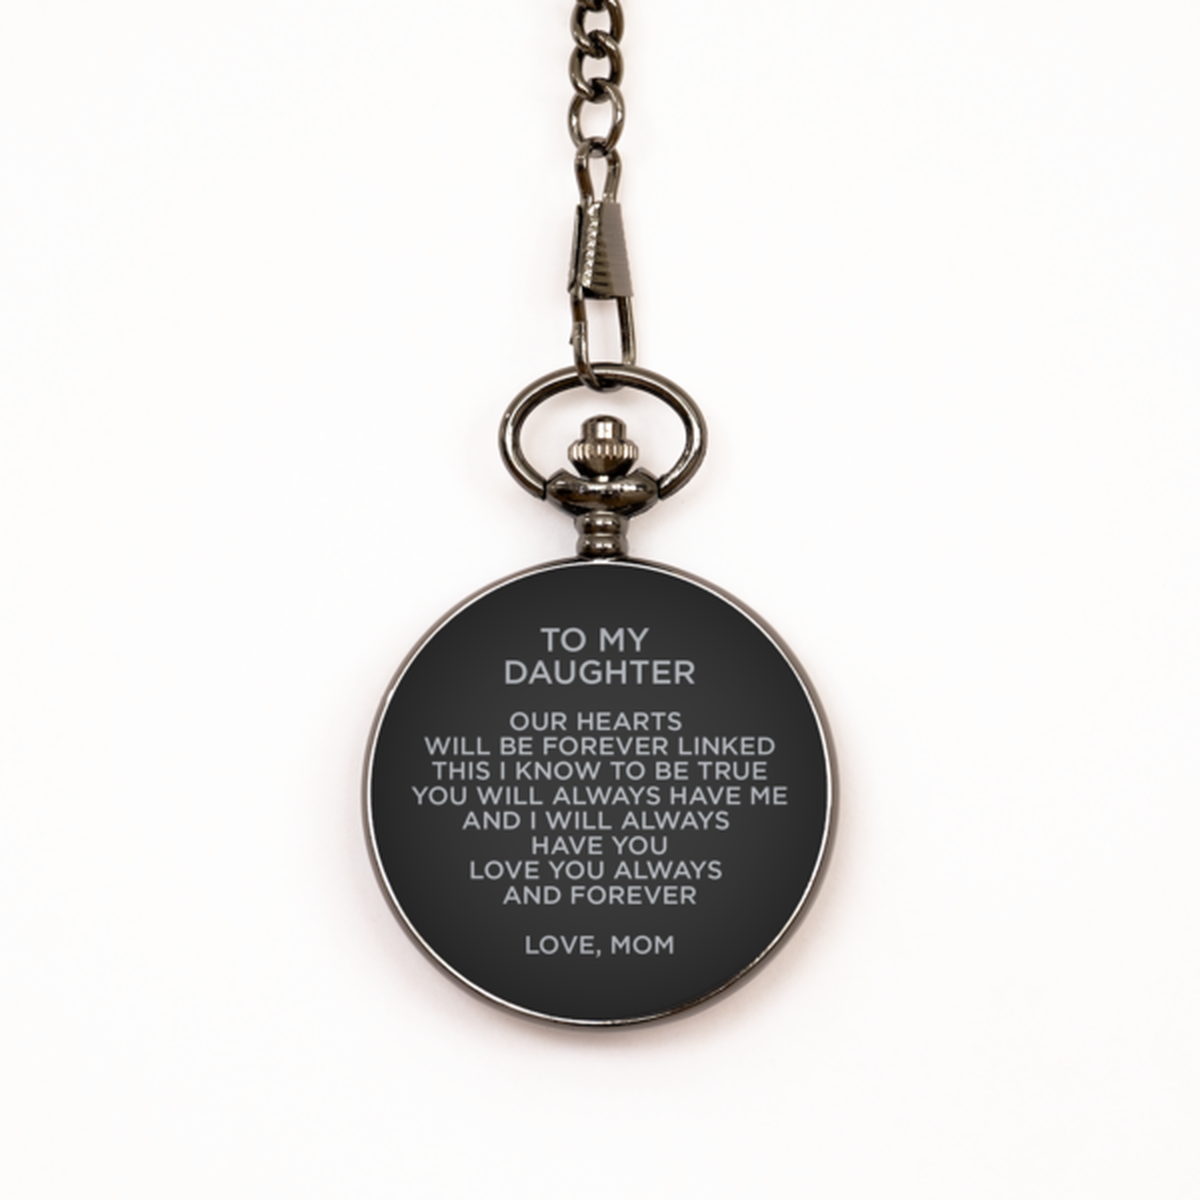 To My Daughter Black Pocket Watch, Always And Forever, Birthday Gifts For Daughter From Mom, Christmas Gifts For Women